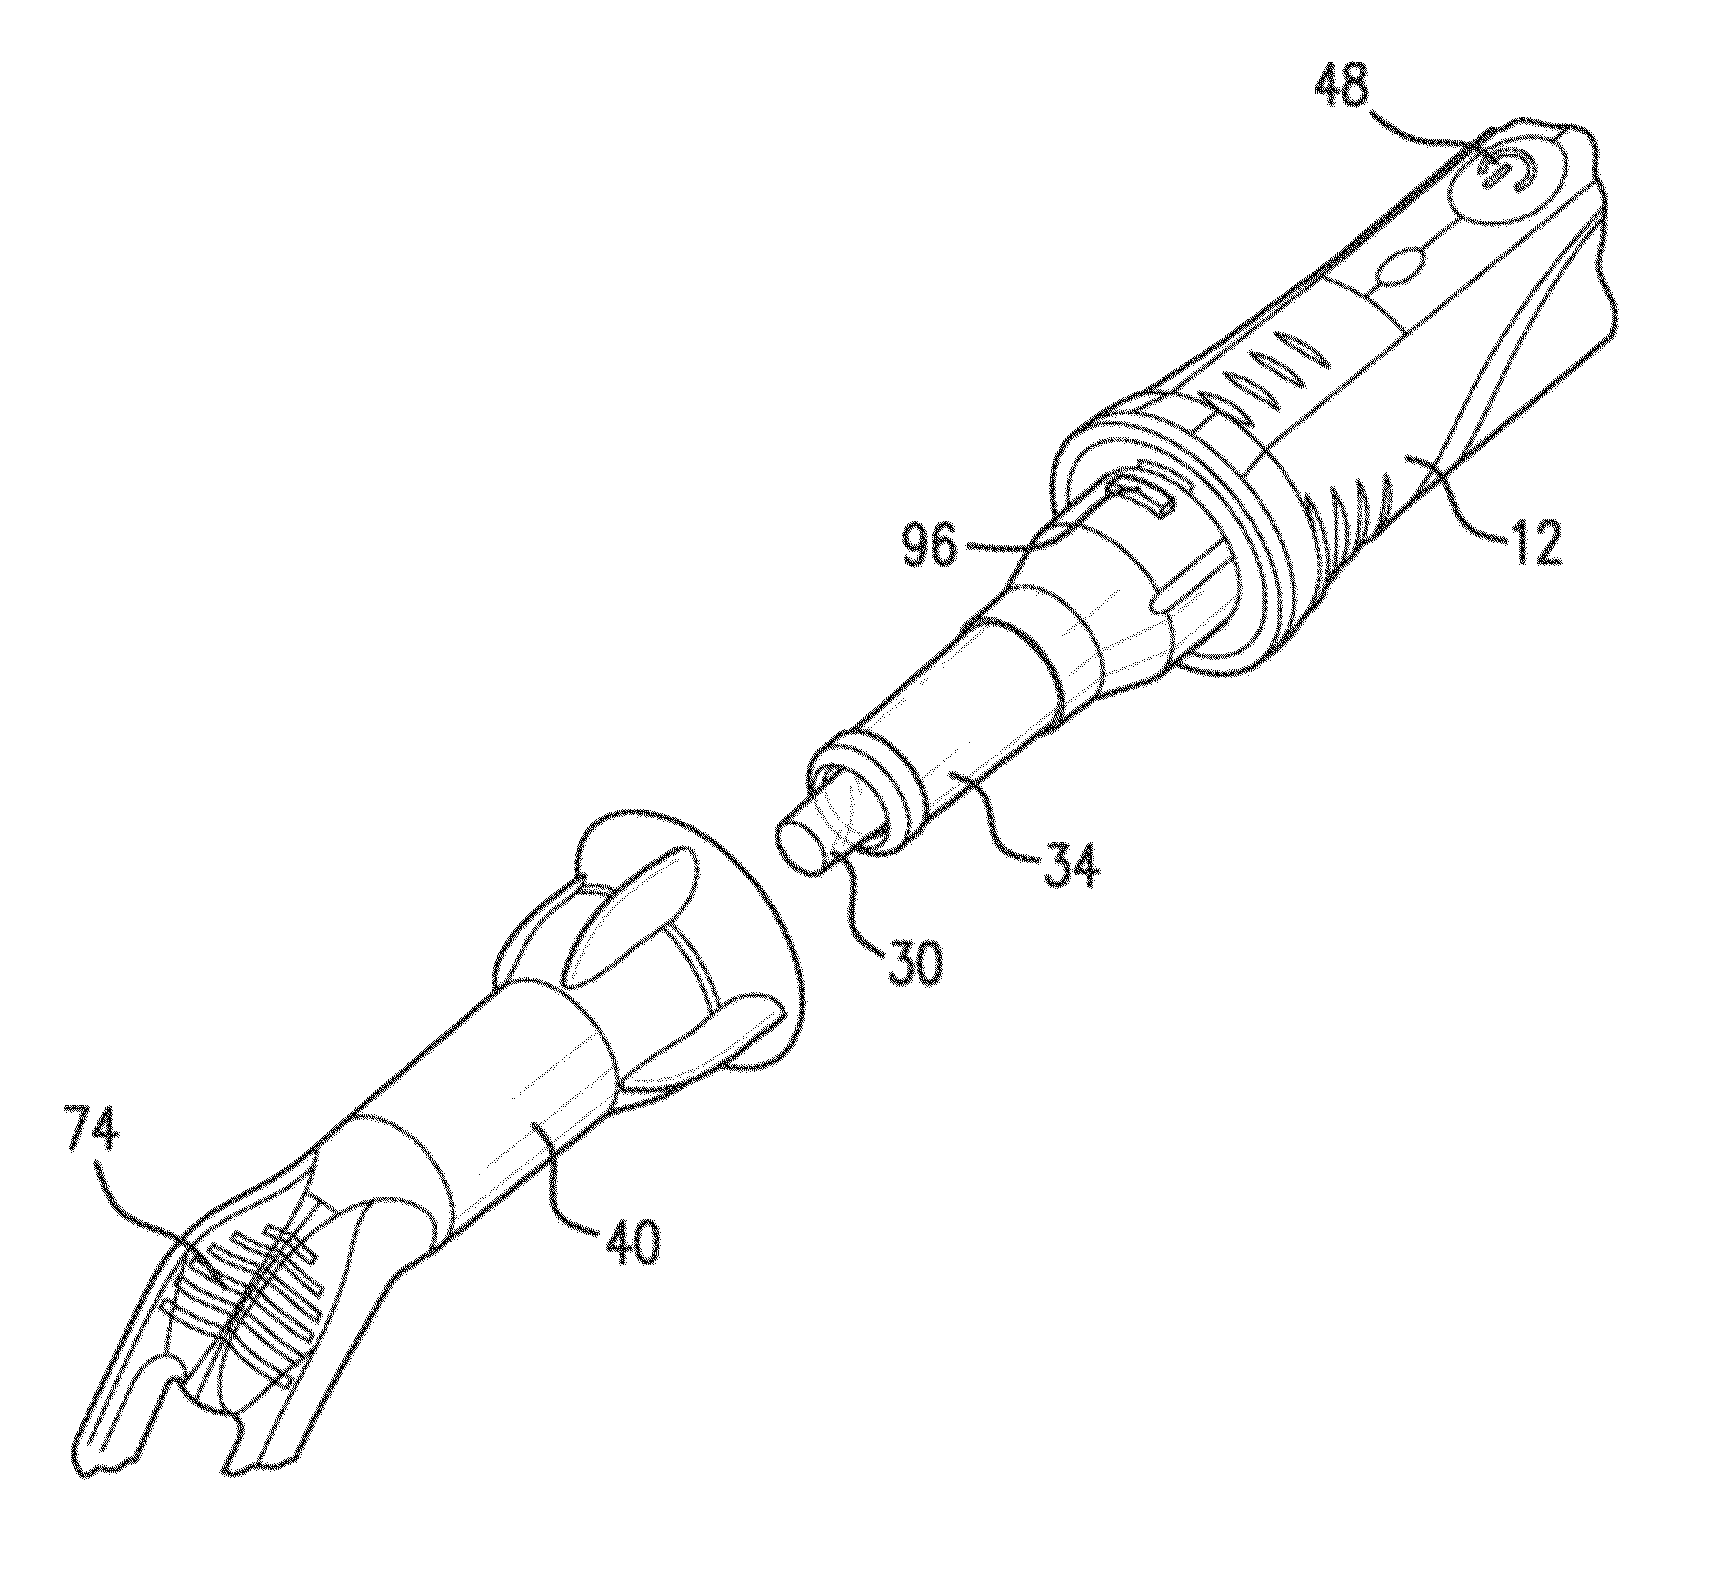 Apparatus, article and method for reducing pain during skin puncturing procedures